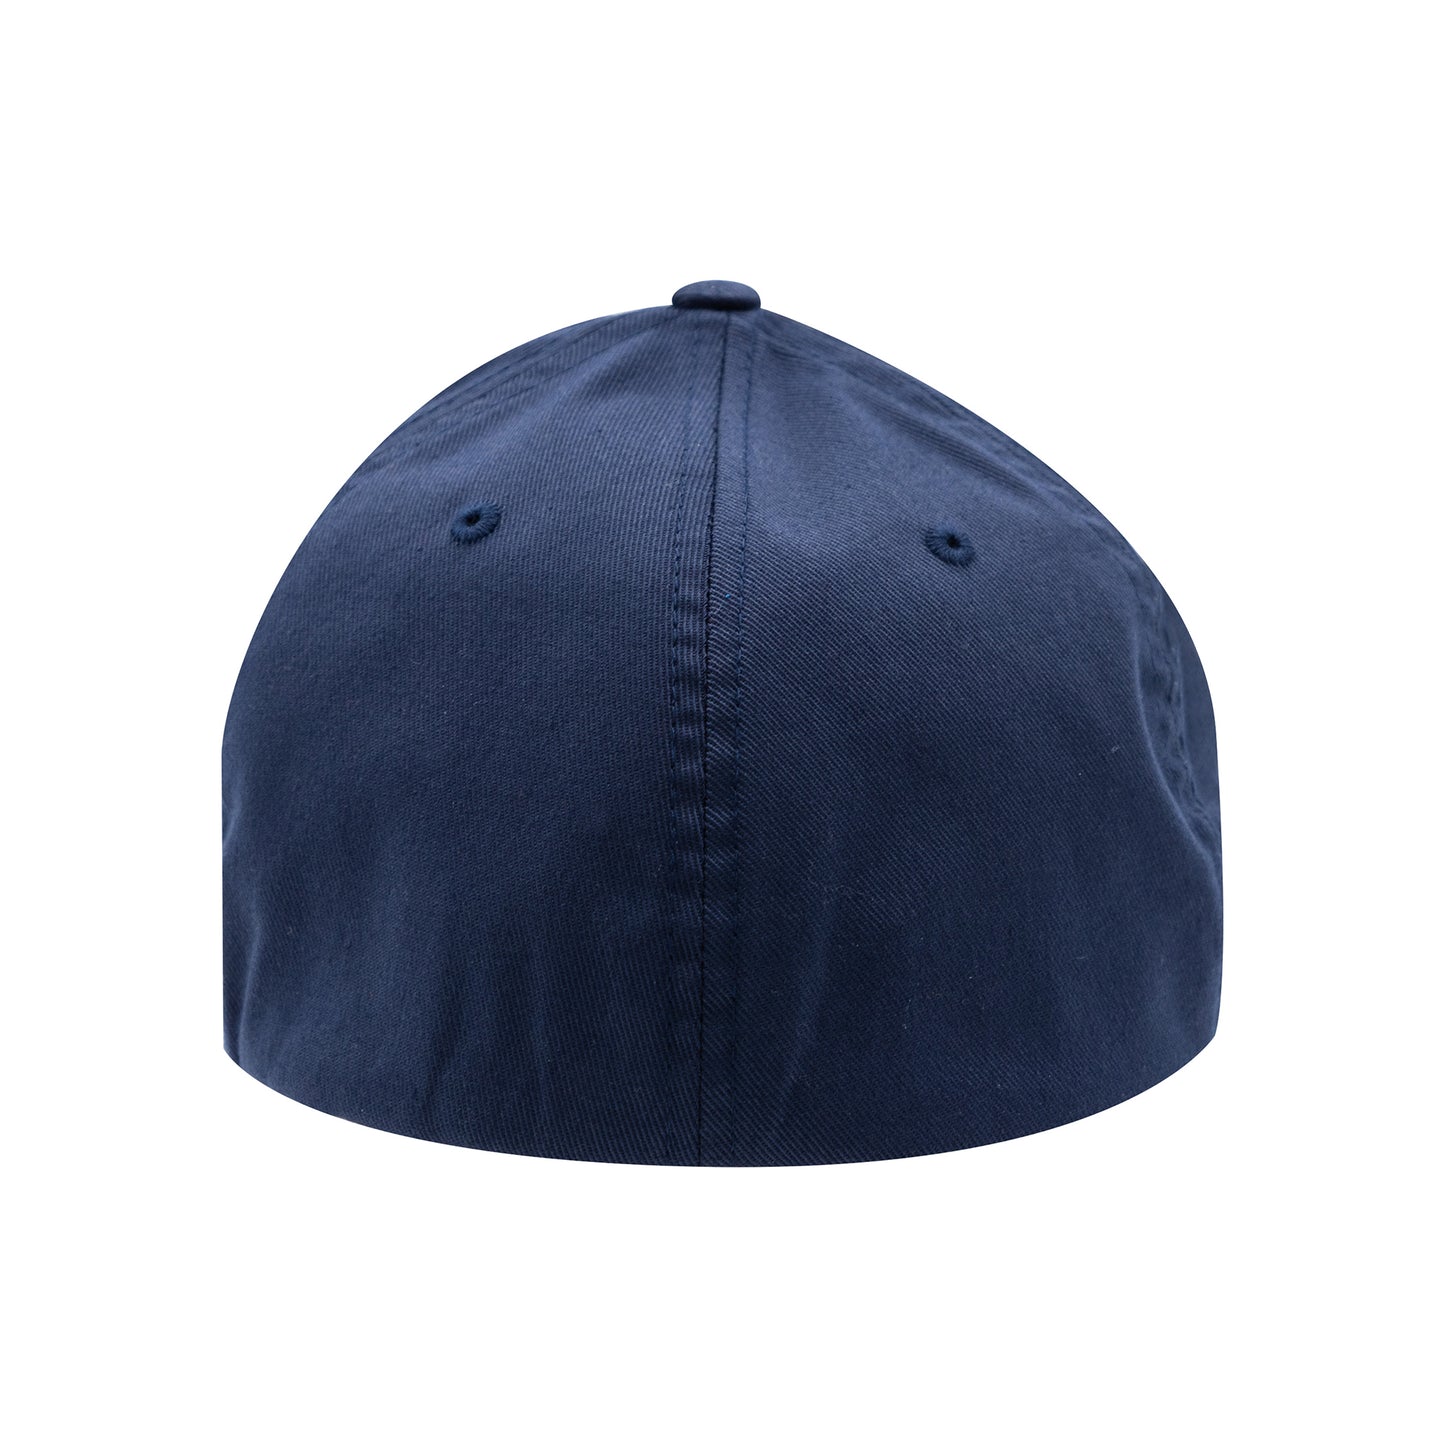 No Laying Up XXL Patch Hat | Navy FlexFit with Gold and Navy Retro PVC Patch